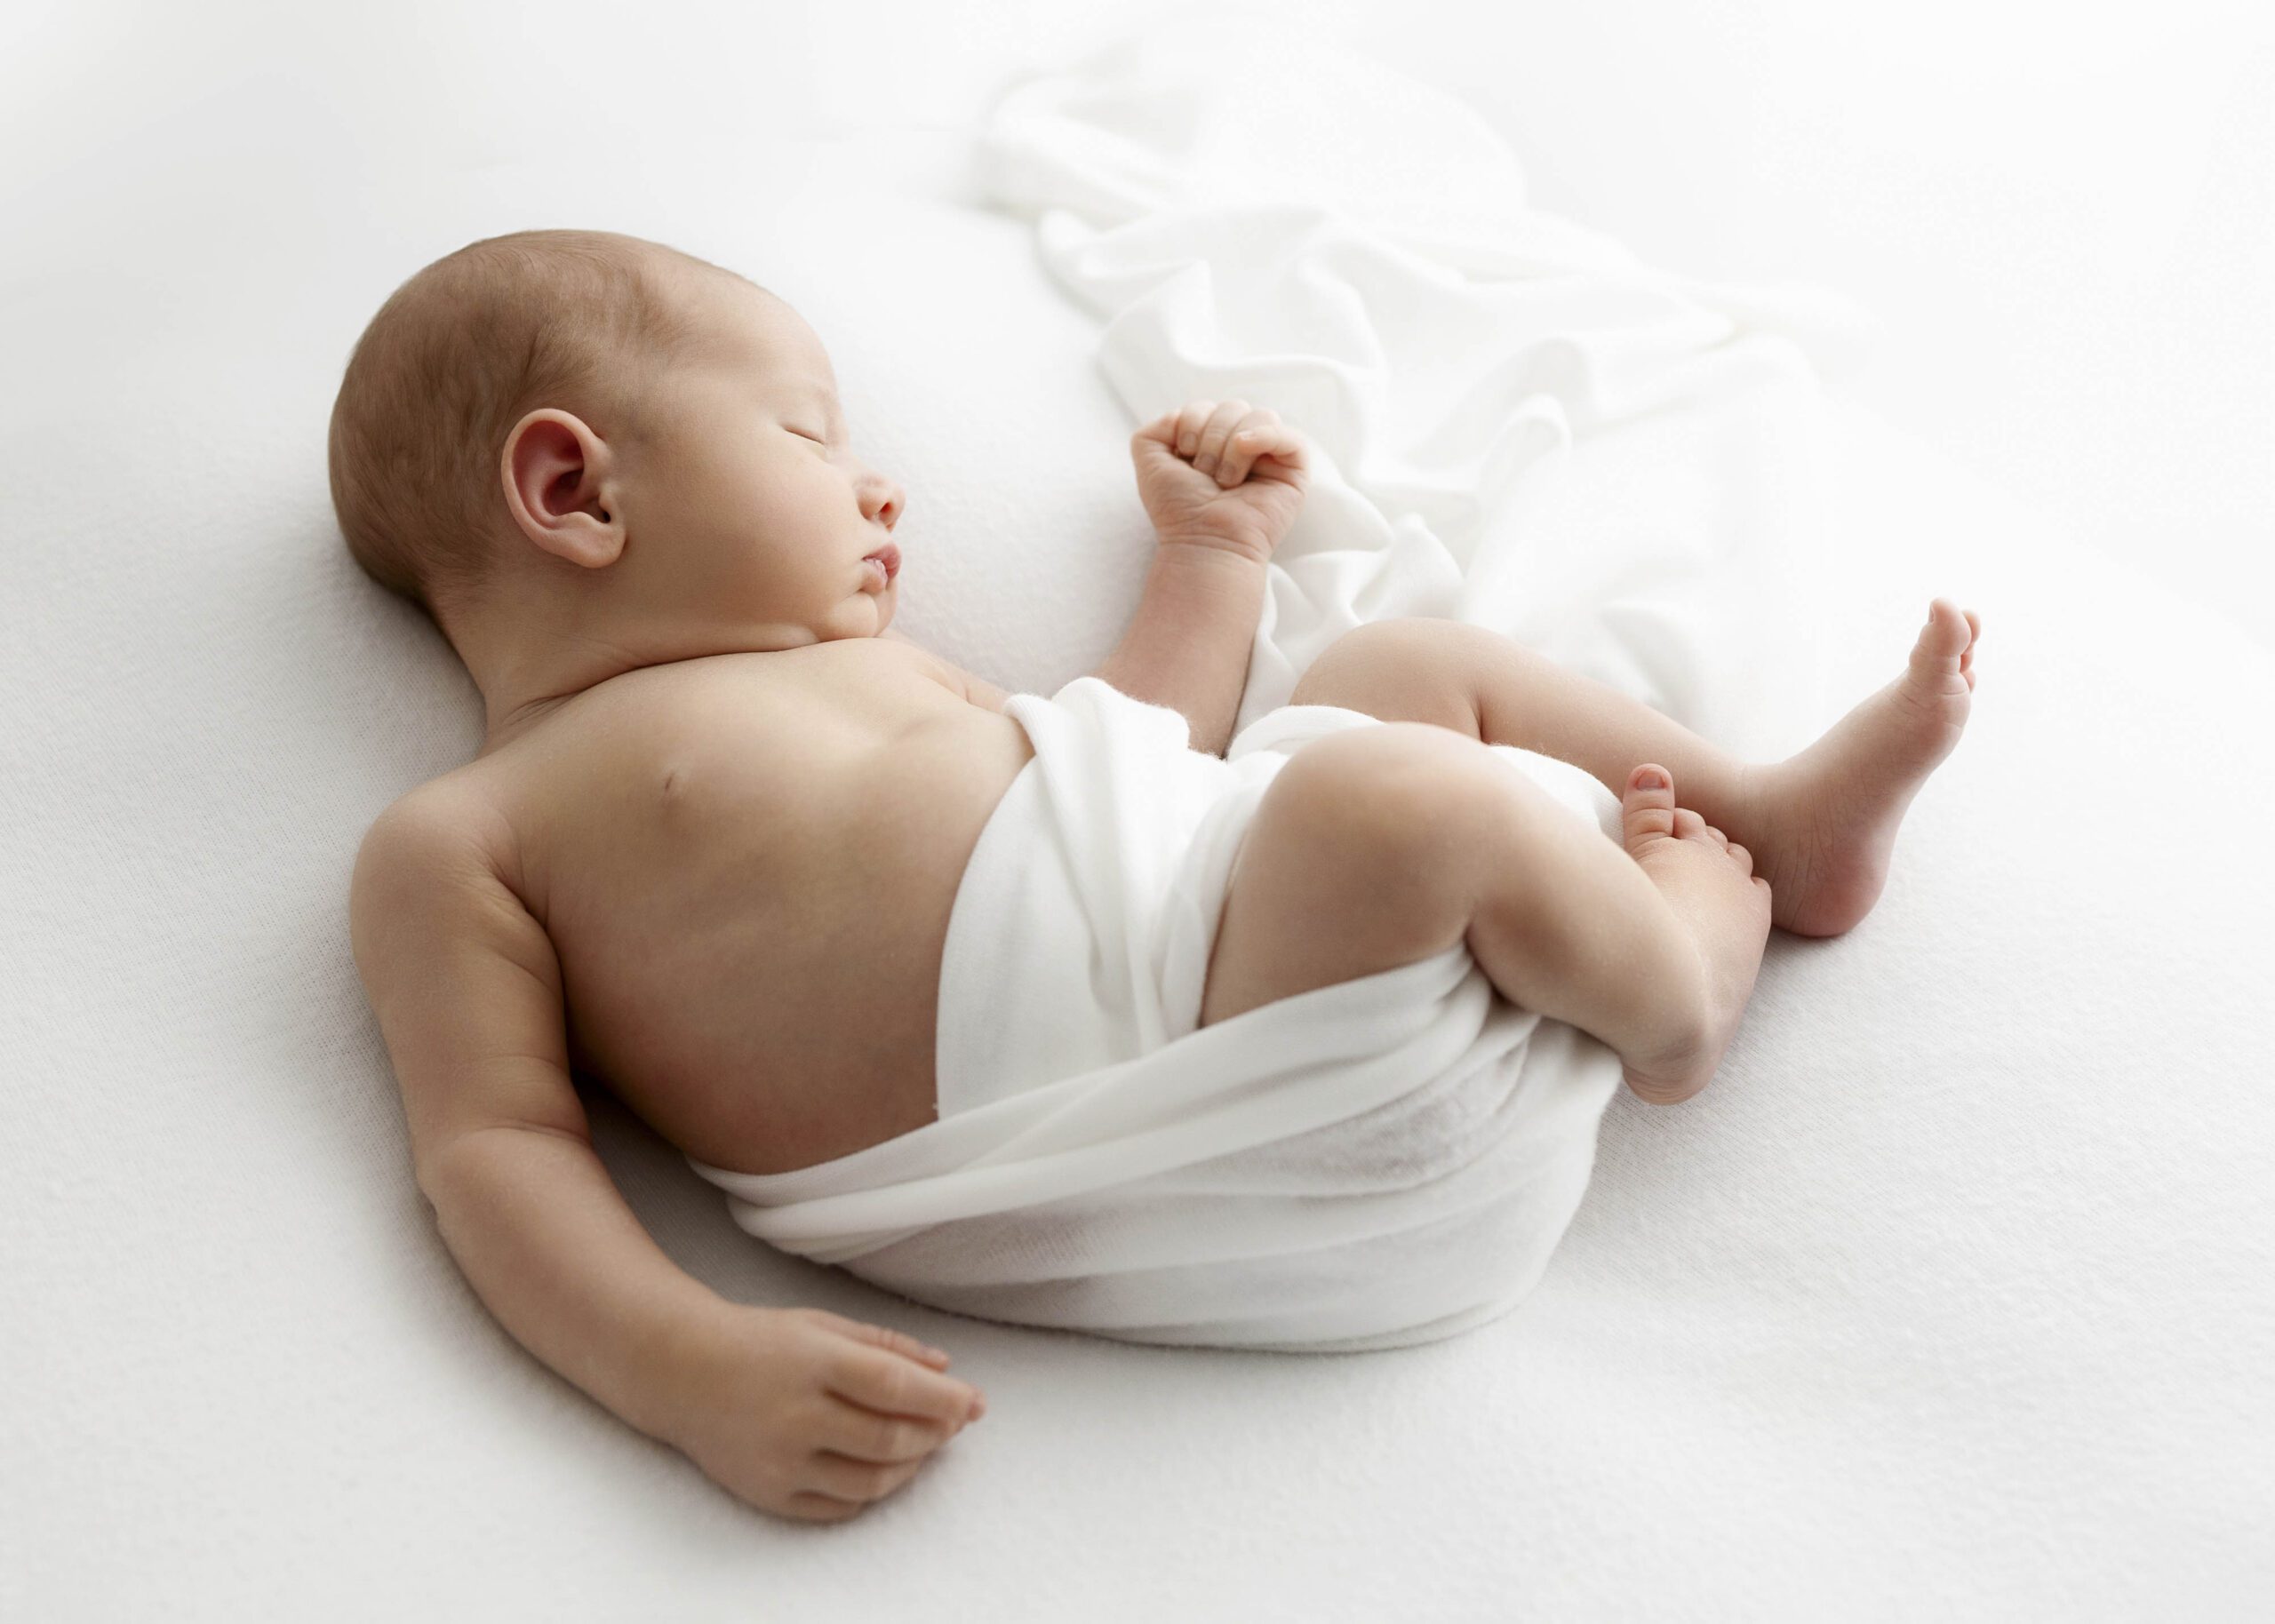 Newborn baby sleeping with white sheet loosely wrapped around him.